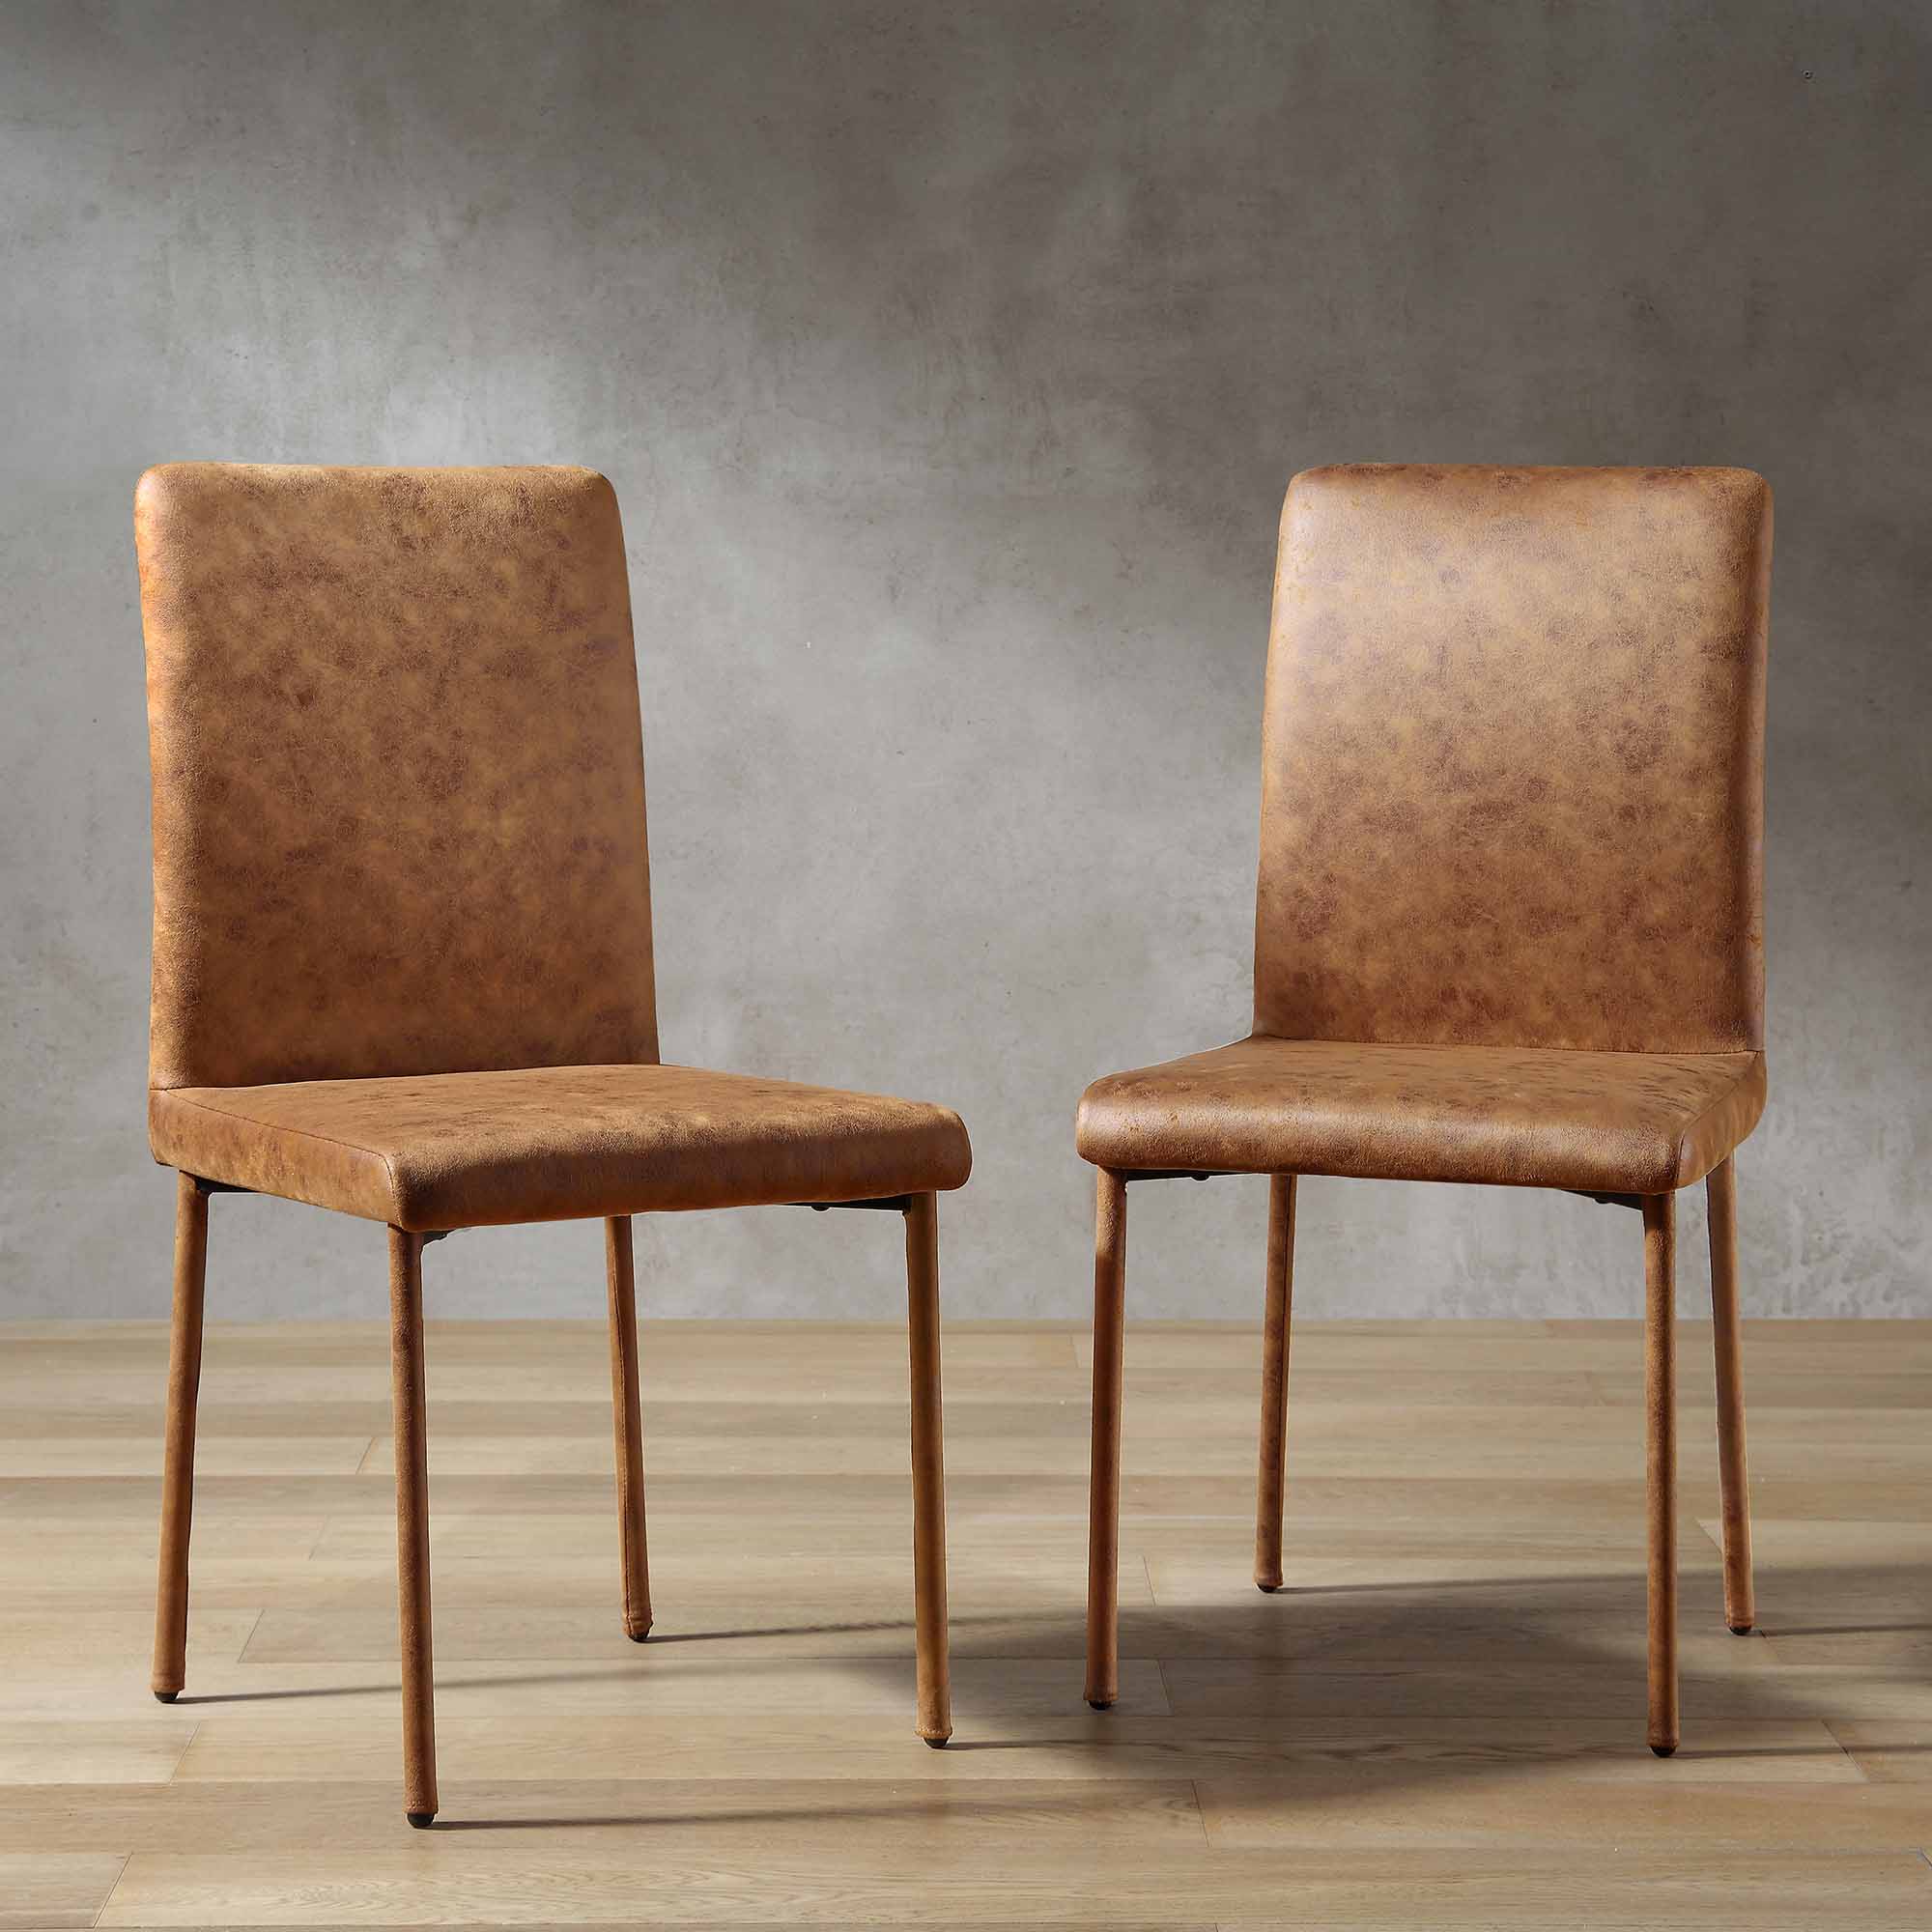 Fernie Set of 2 Cognac Vegan Leather Dining Chairs with Upholstered Legs